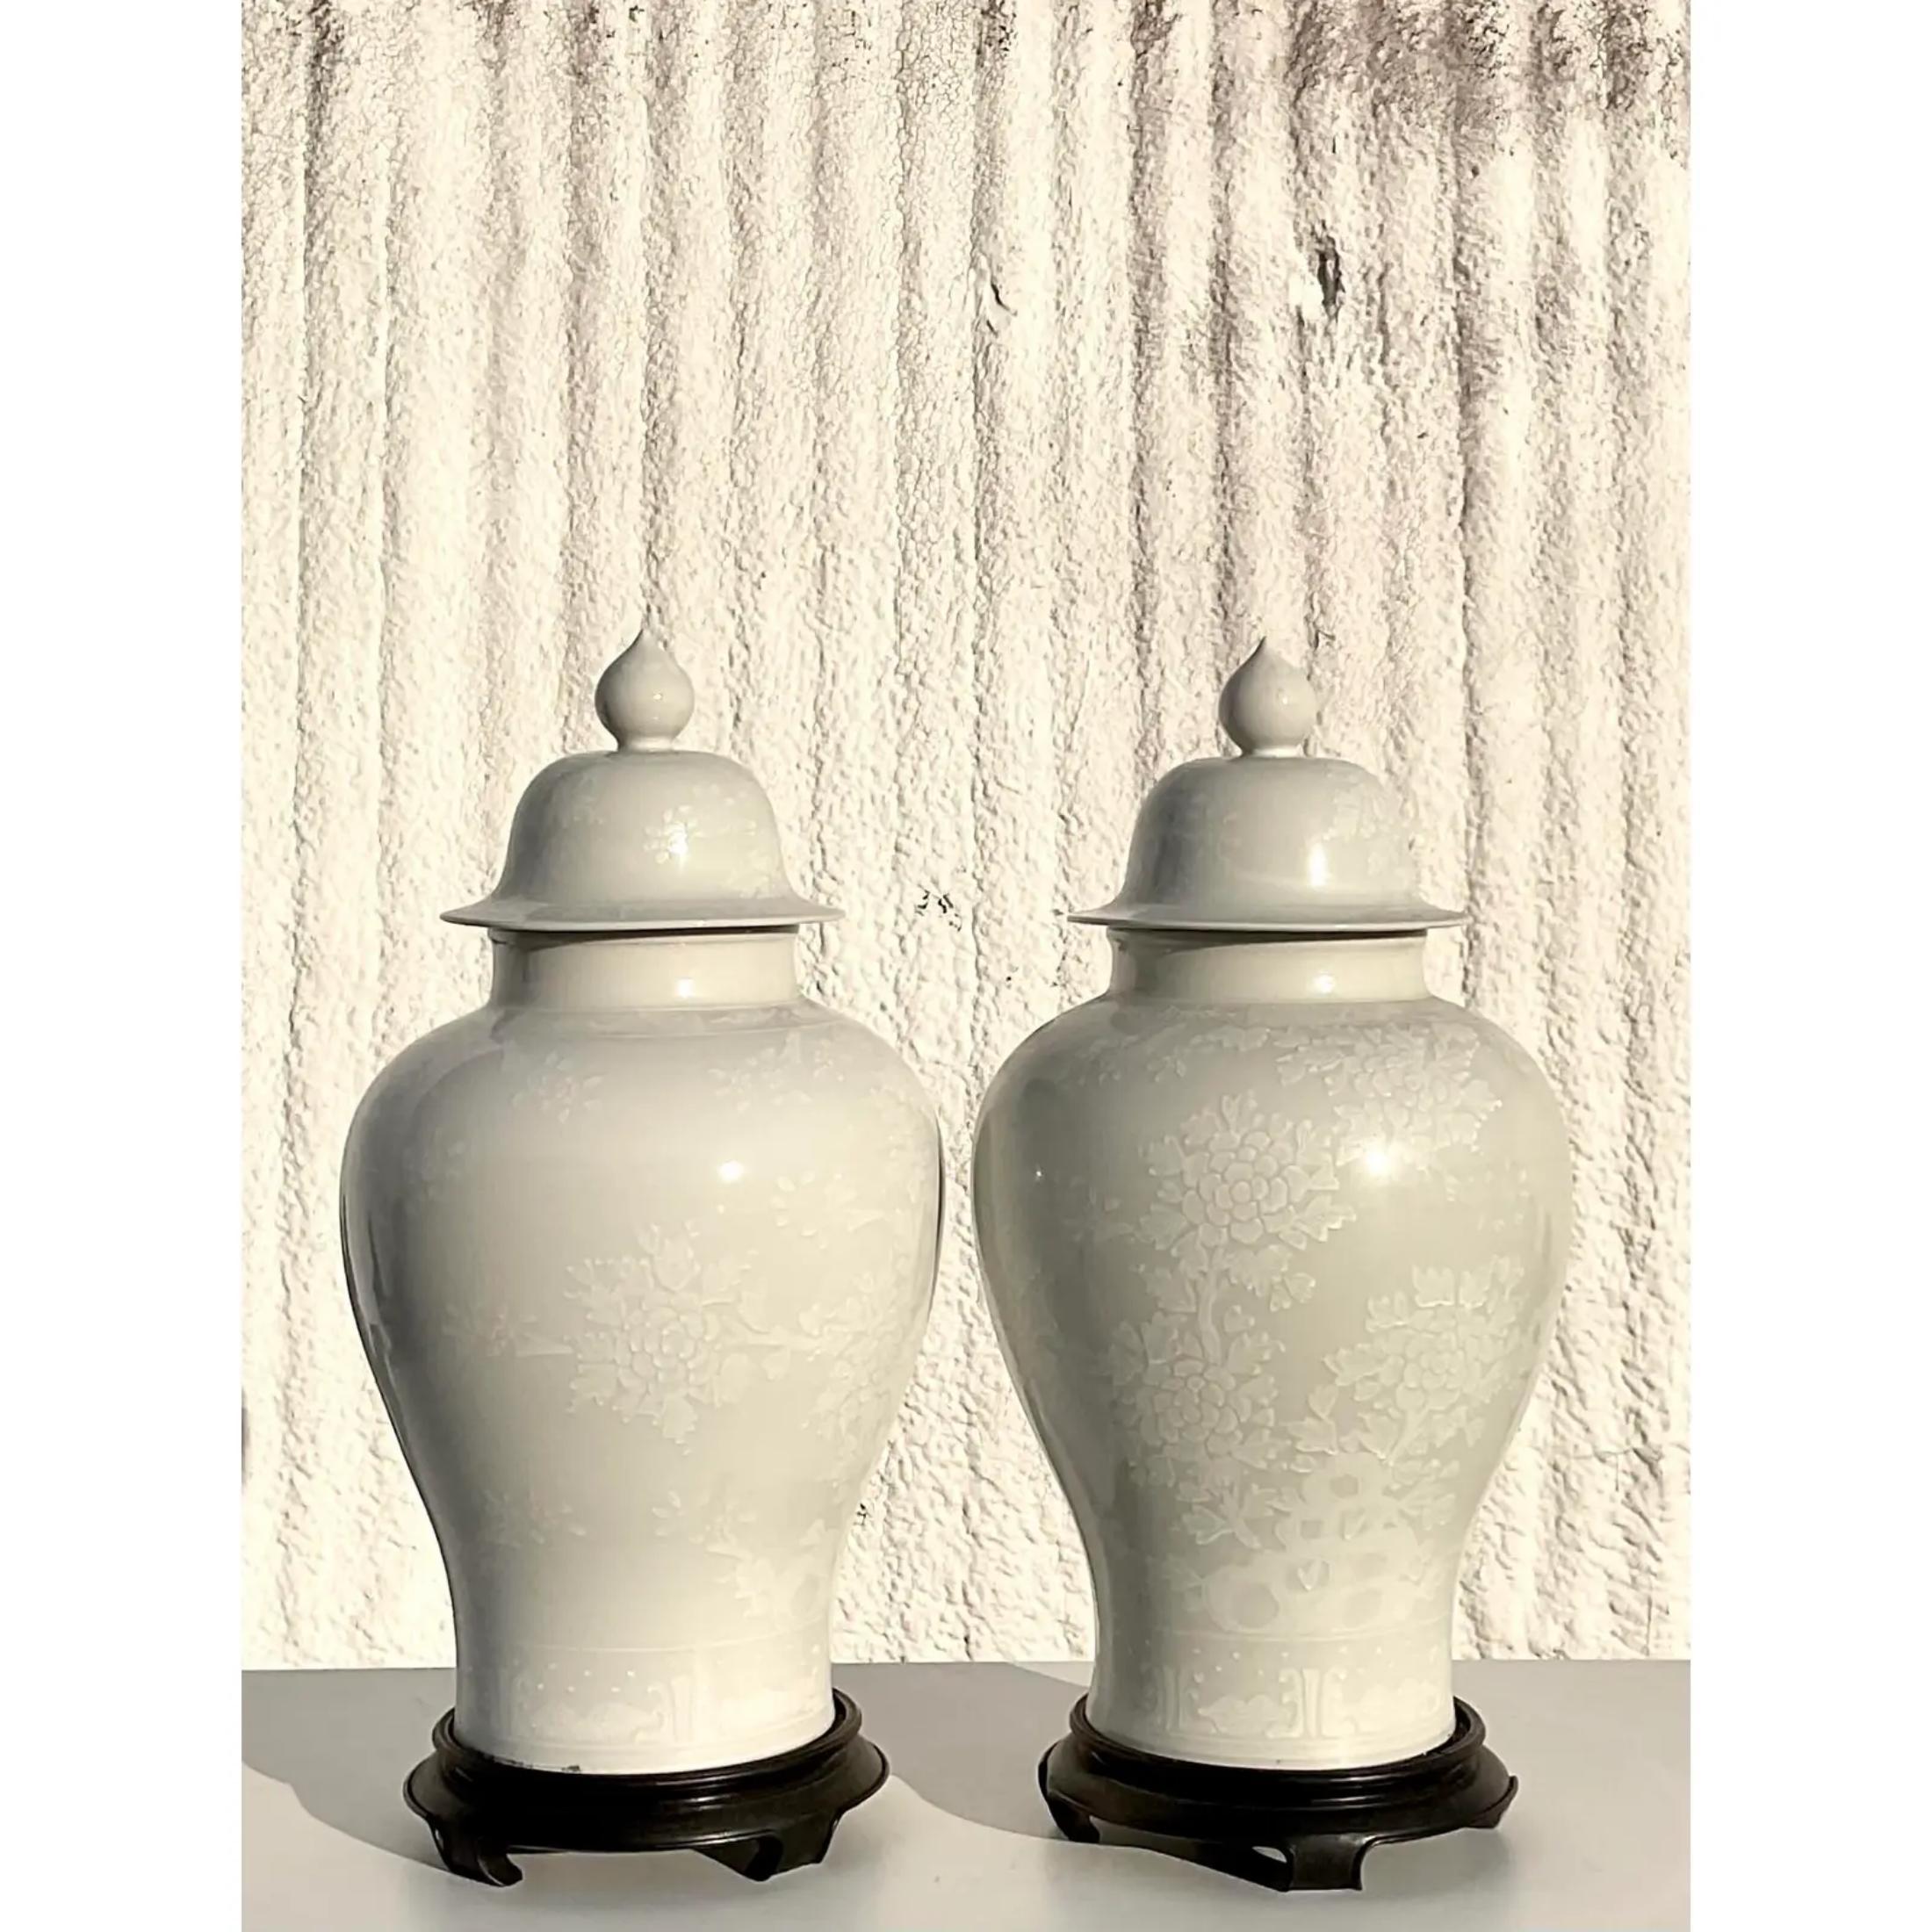 Vintage Asian Floral Ginger Jar Urns - a Pair In Good Condition For Sale In west palm beach, FL